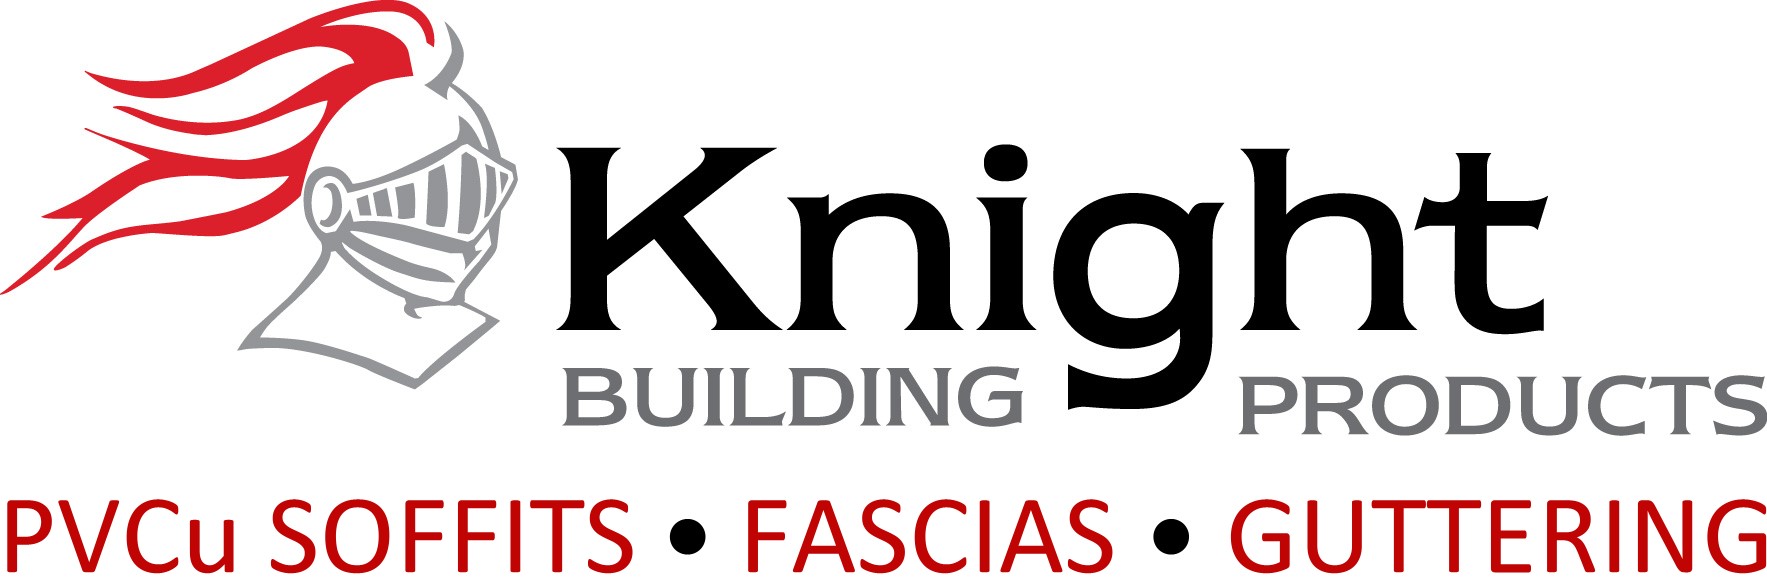 Knight Building Products Logo